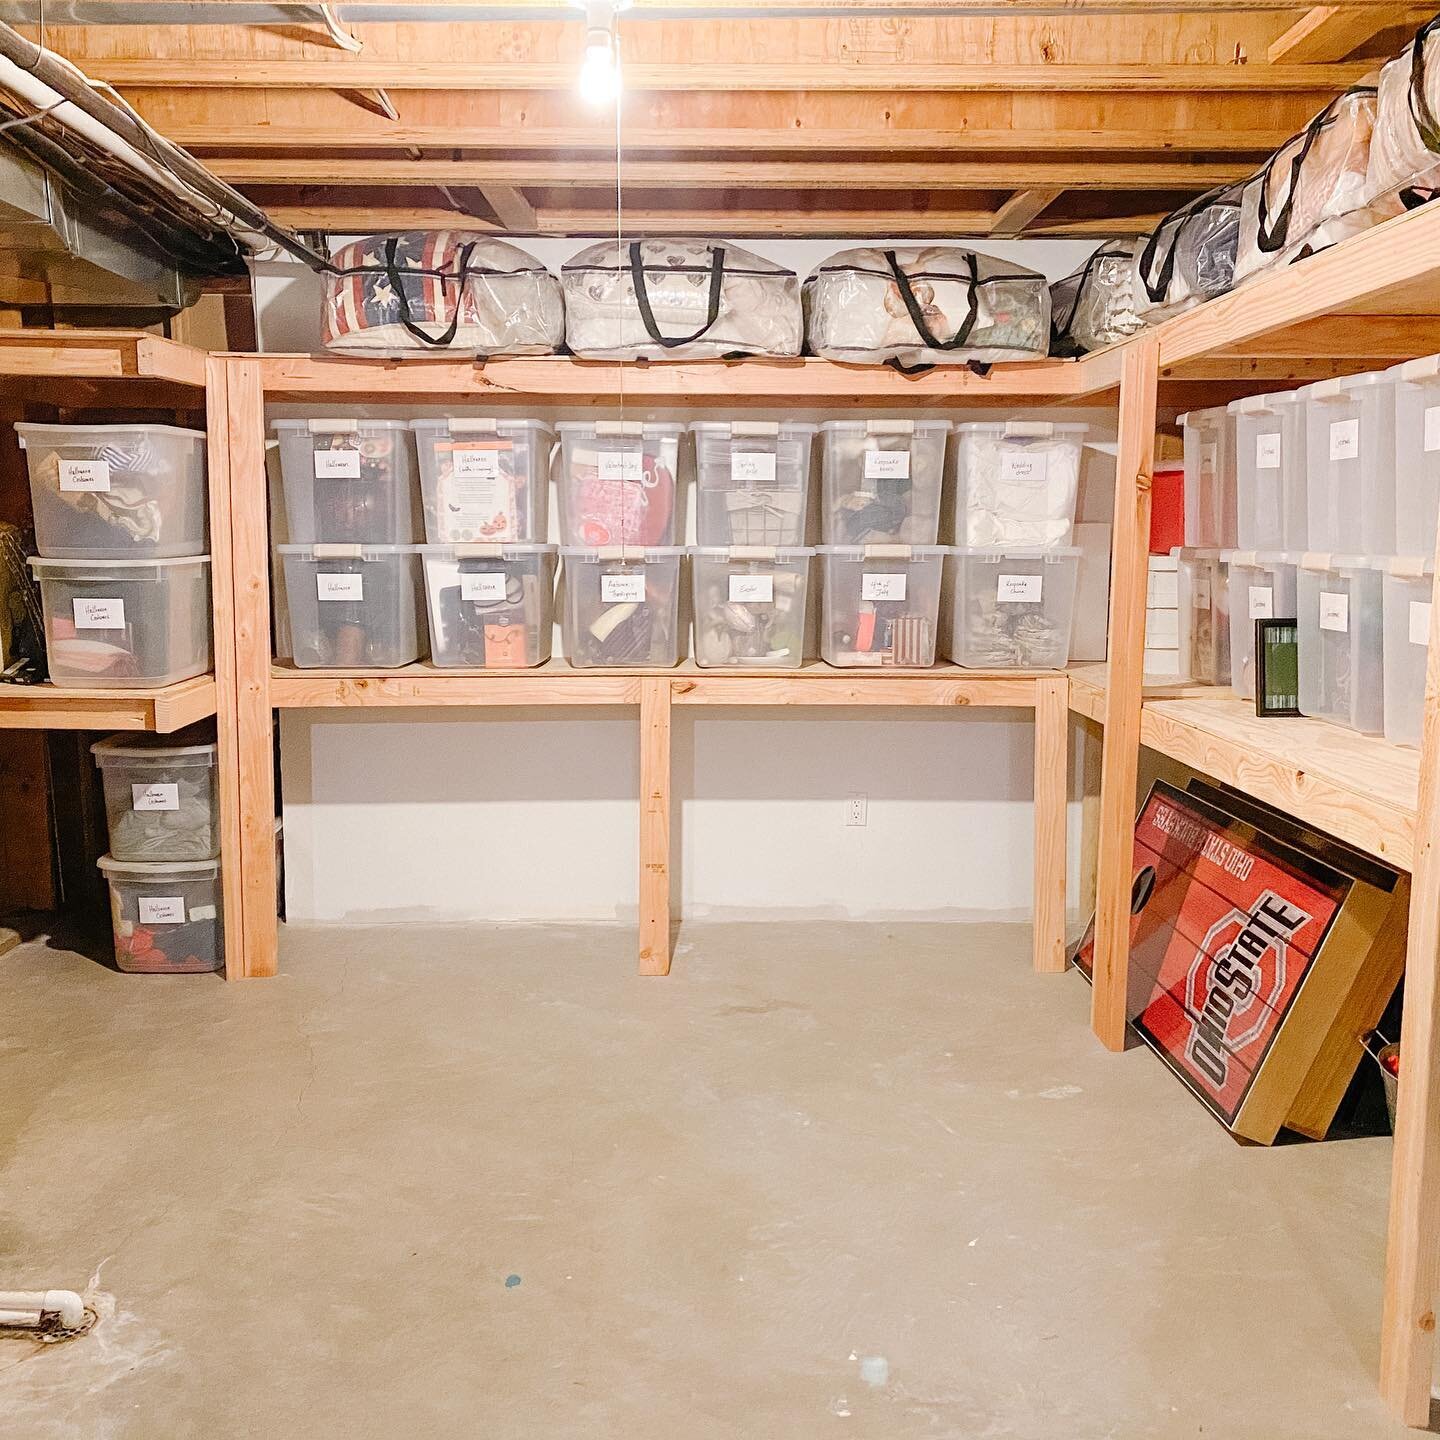 STORAGE ROOM.  This storage room was pulled together pretty quickly (after days of sorting &amp; editing out the excess!) thanks to this client&rsquo;s handy husband who built all these wood storage shelves.
⠀⠀⠀⠀⠀⠀⠀⠀⠀
The clear bins not only allow yo